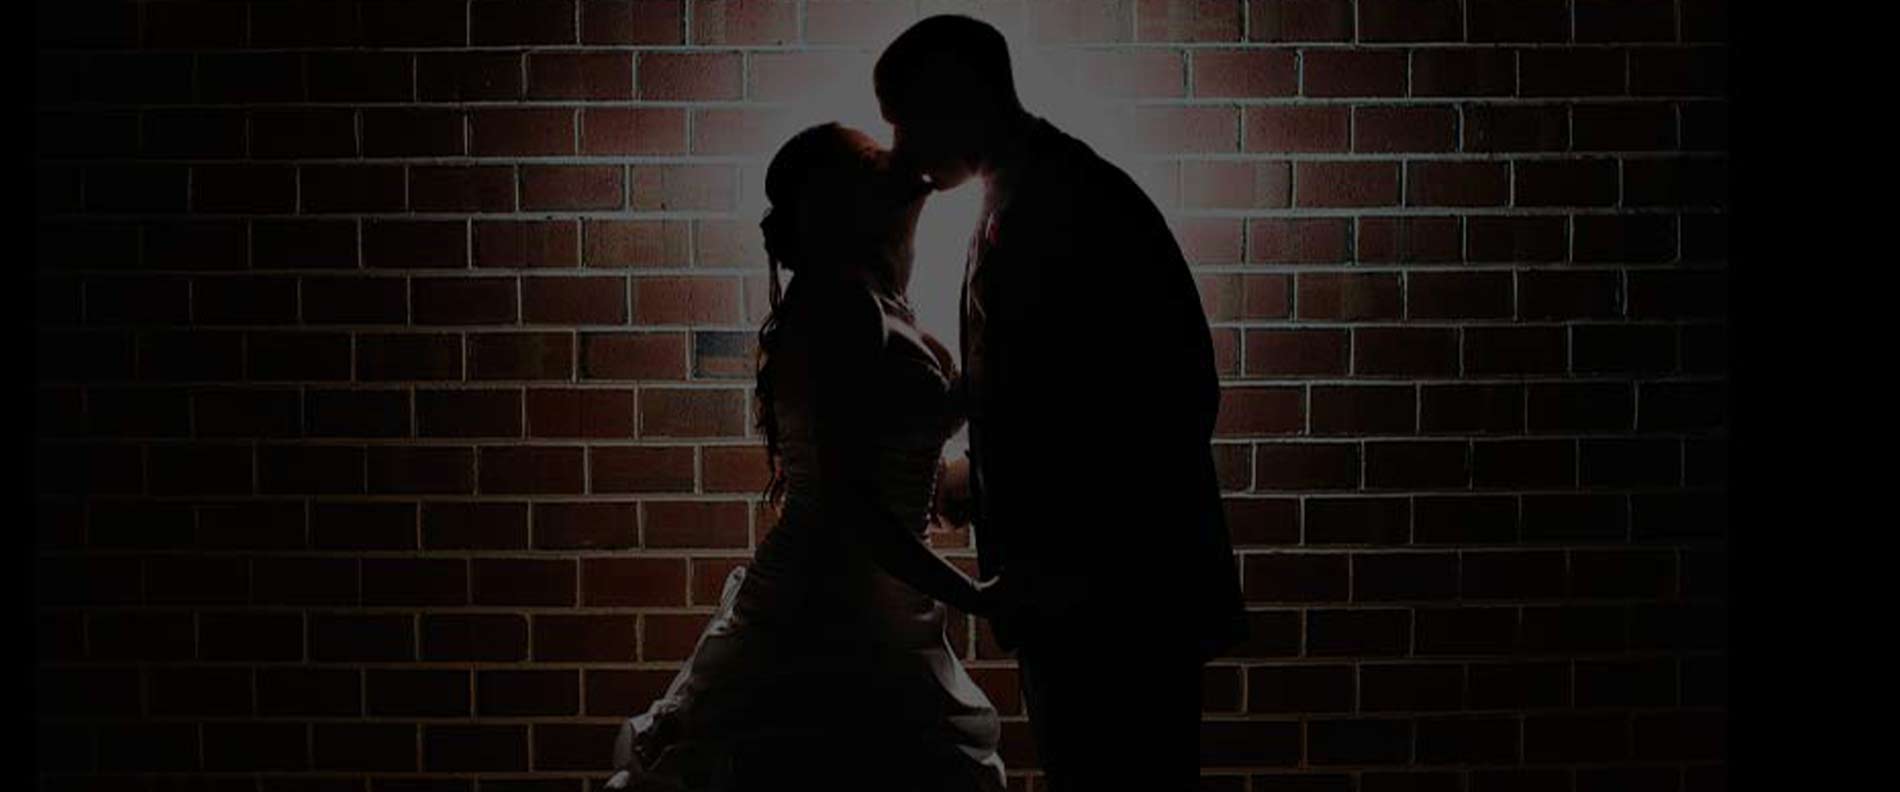 A bride and groom kissing in a brick backround.